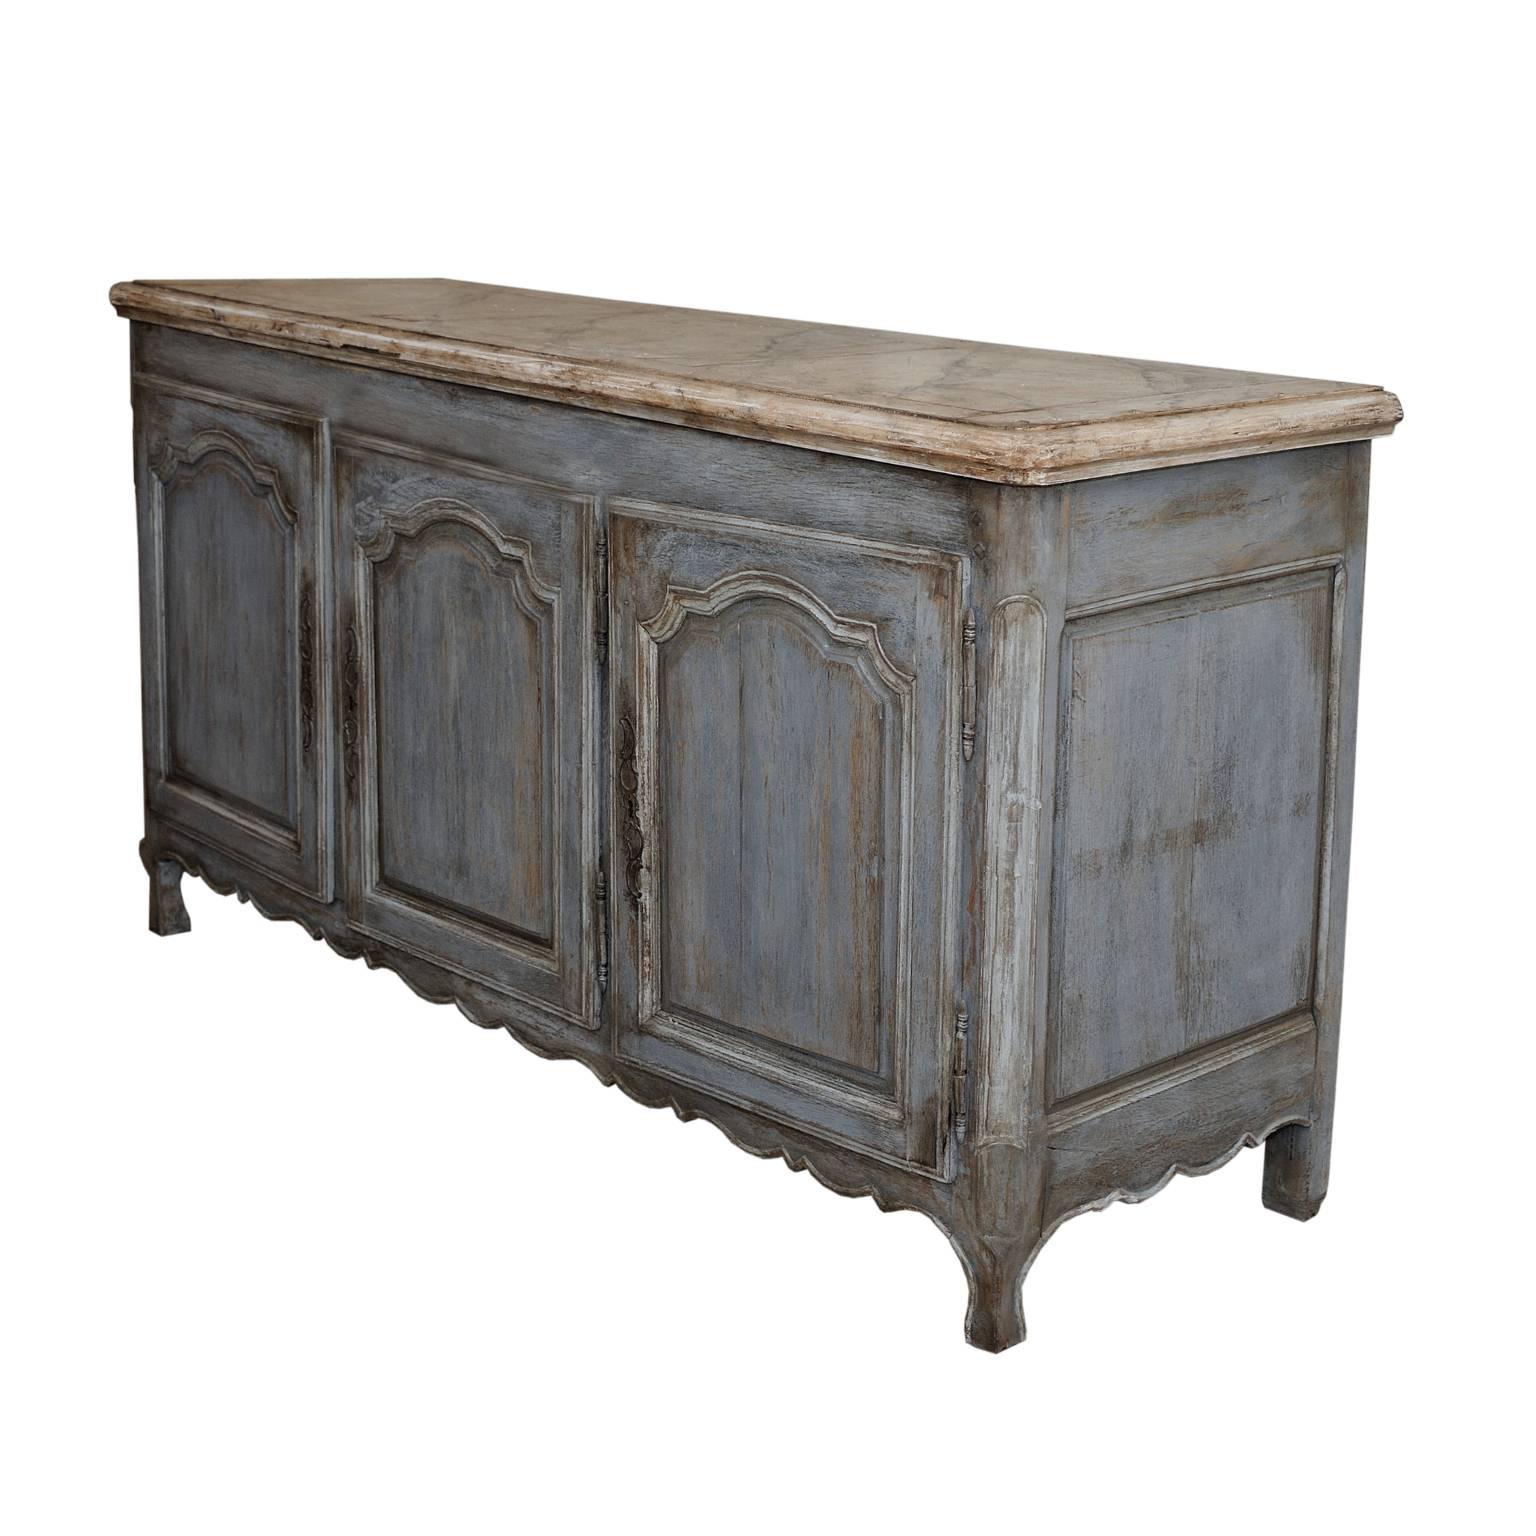 Hand-Painted French Mid-19th Century Louis XV Painted Three-Door Enfilade Dresser, circa 1750 For Sale